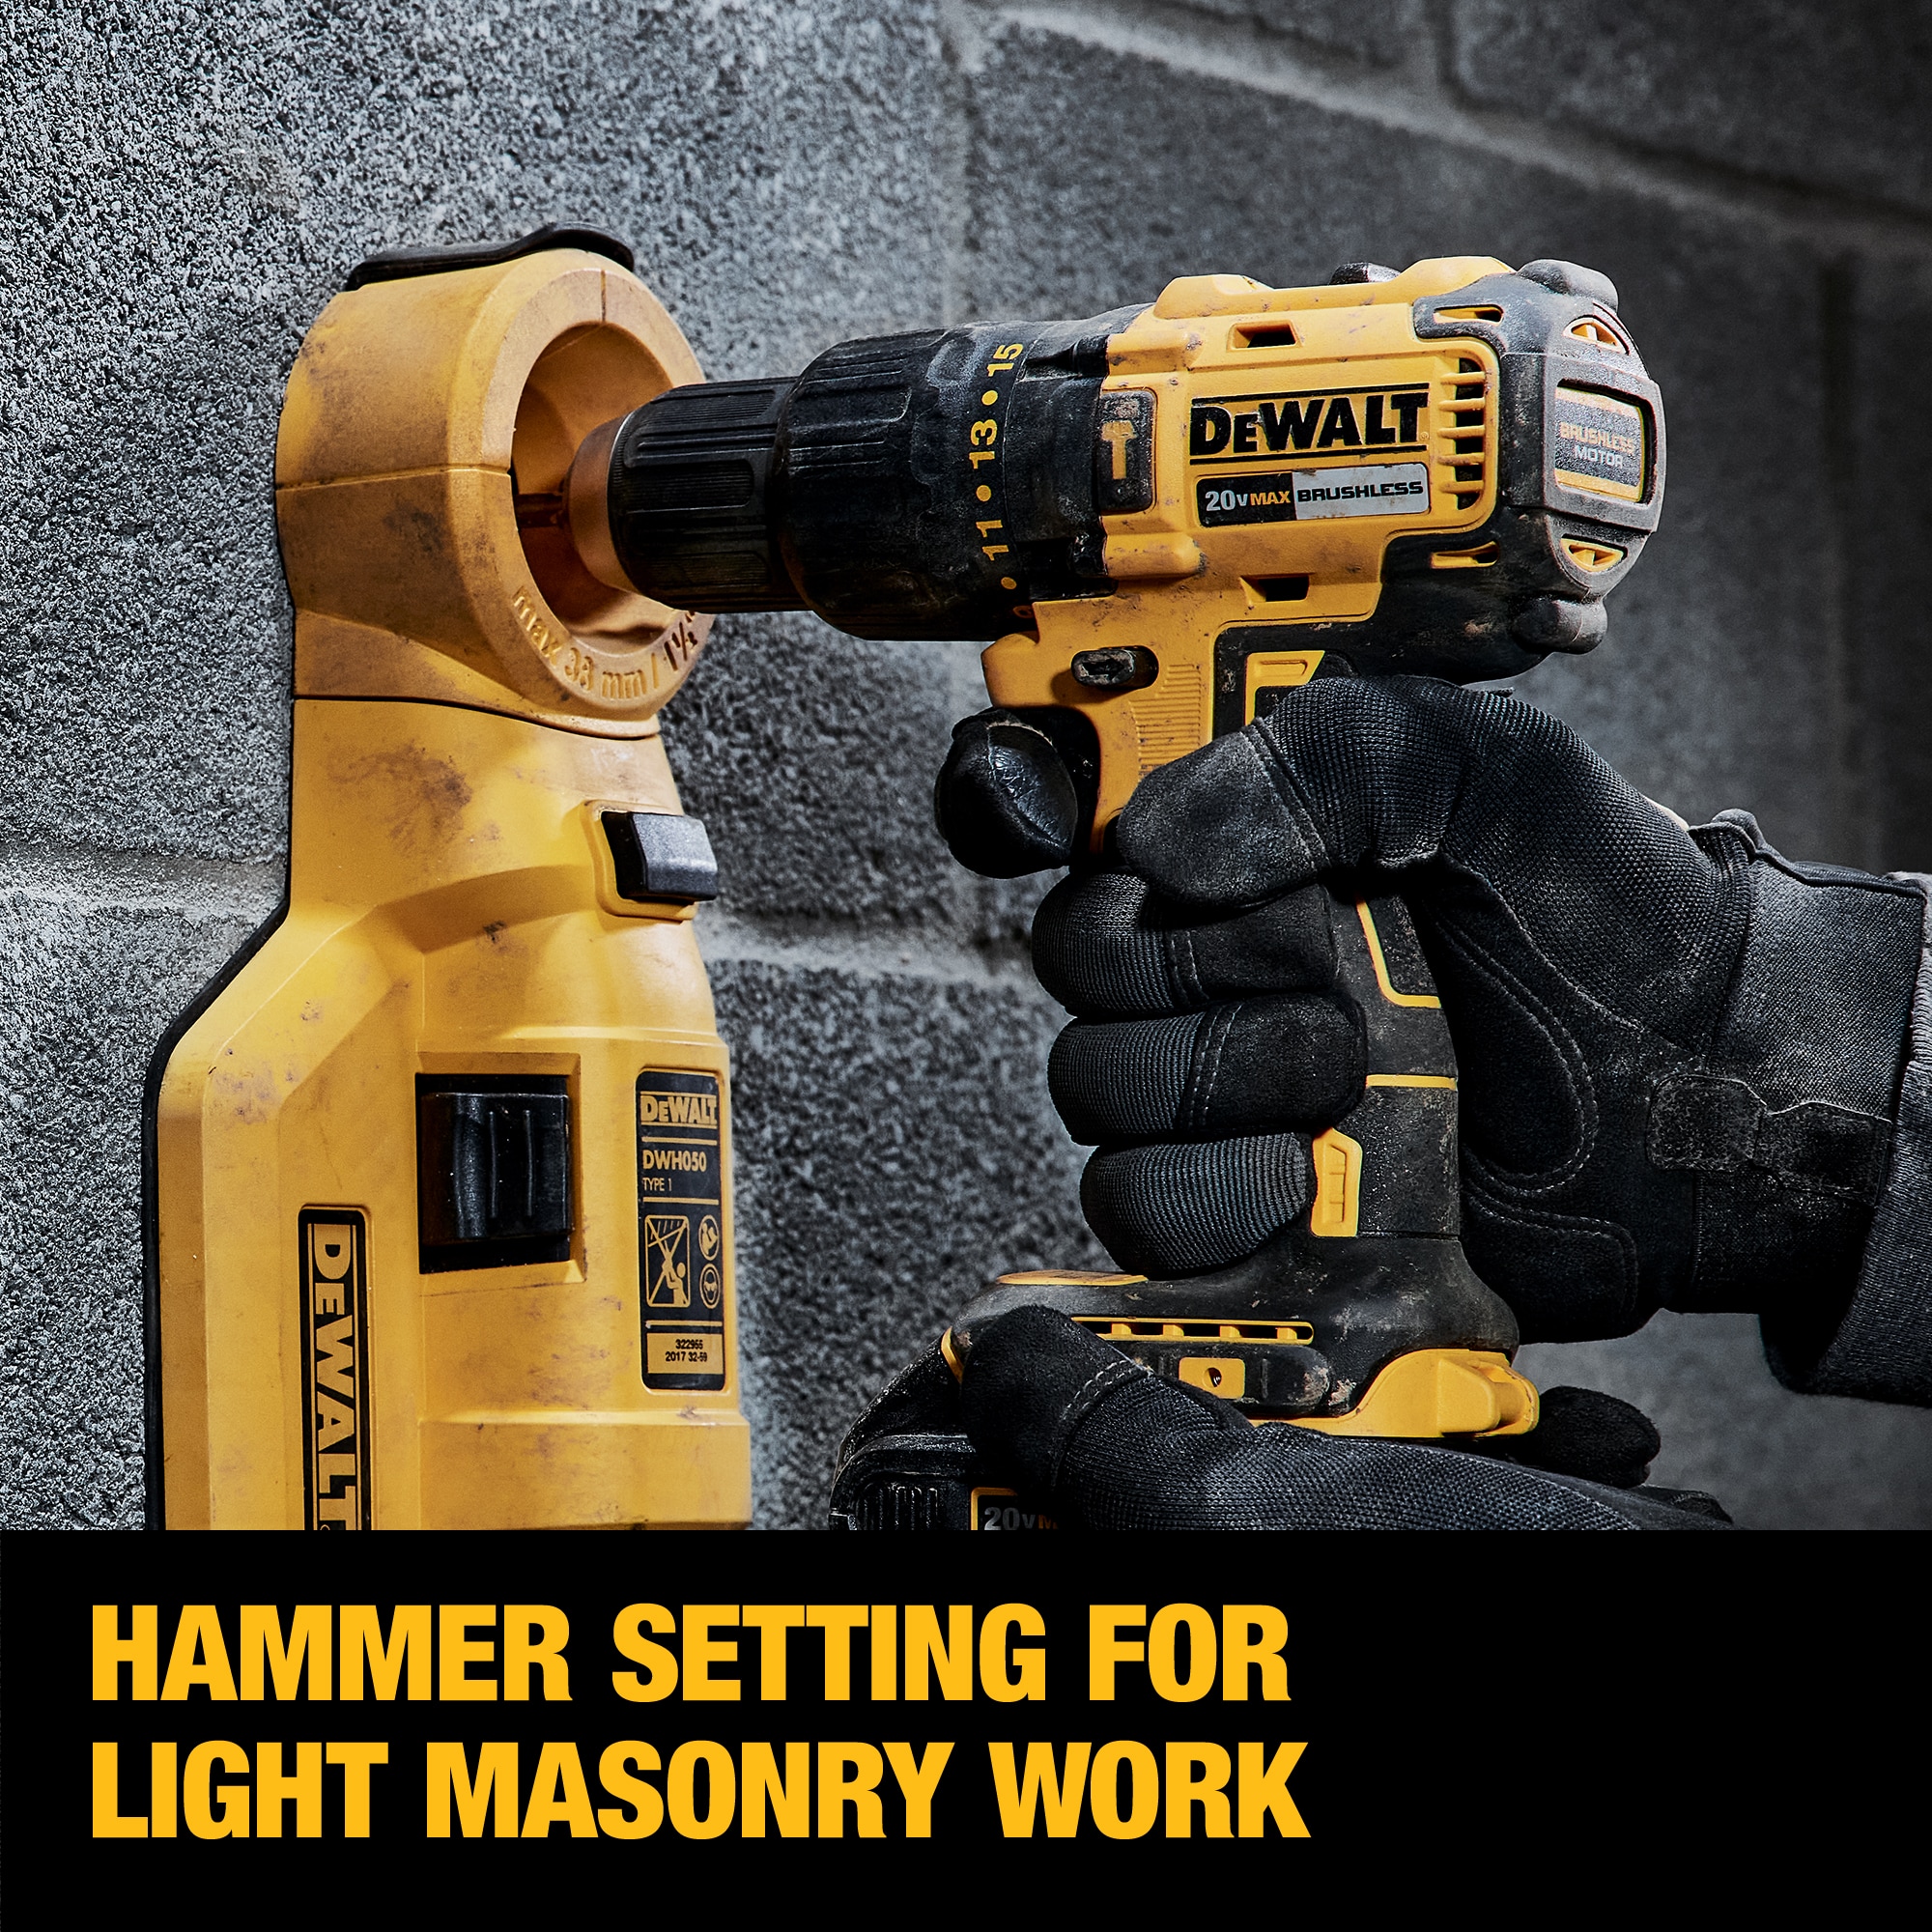 20V MAX Compact BRUSHLESS HAMMERDRILL